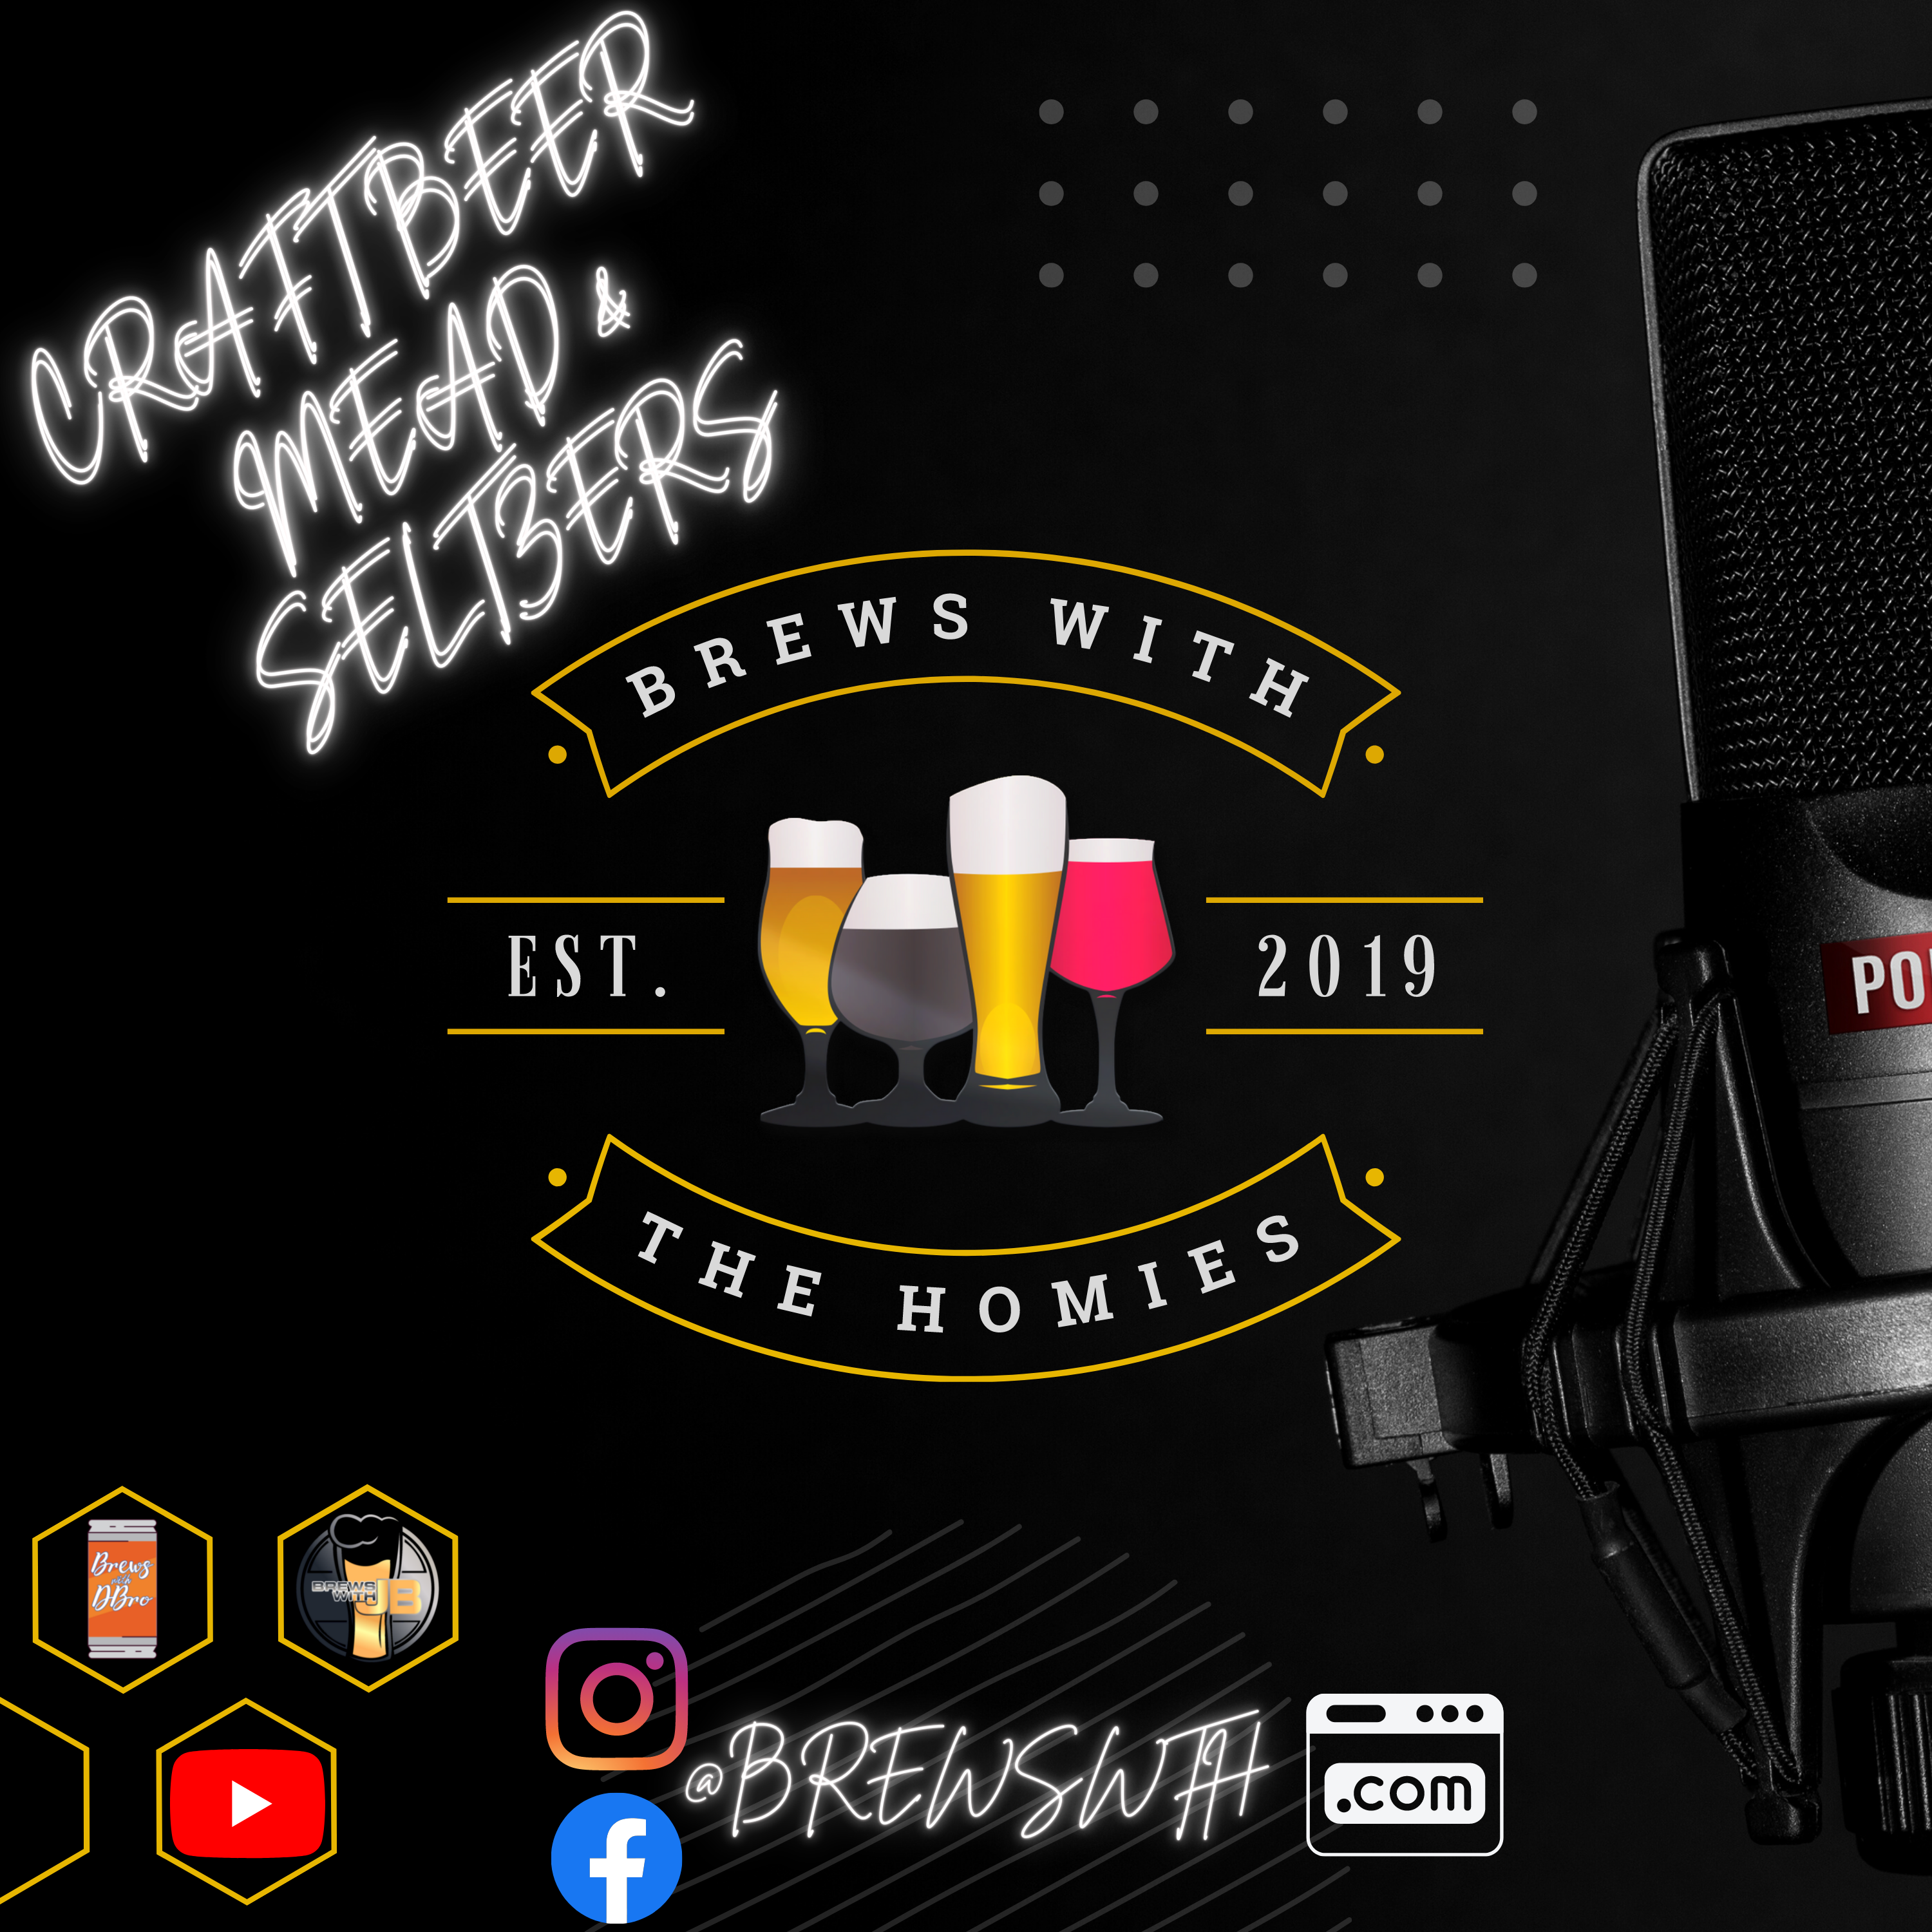 17. Beer talk with the homies (Lighter beer edition)